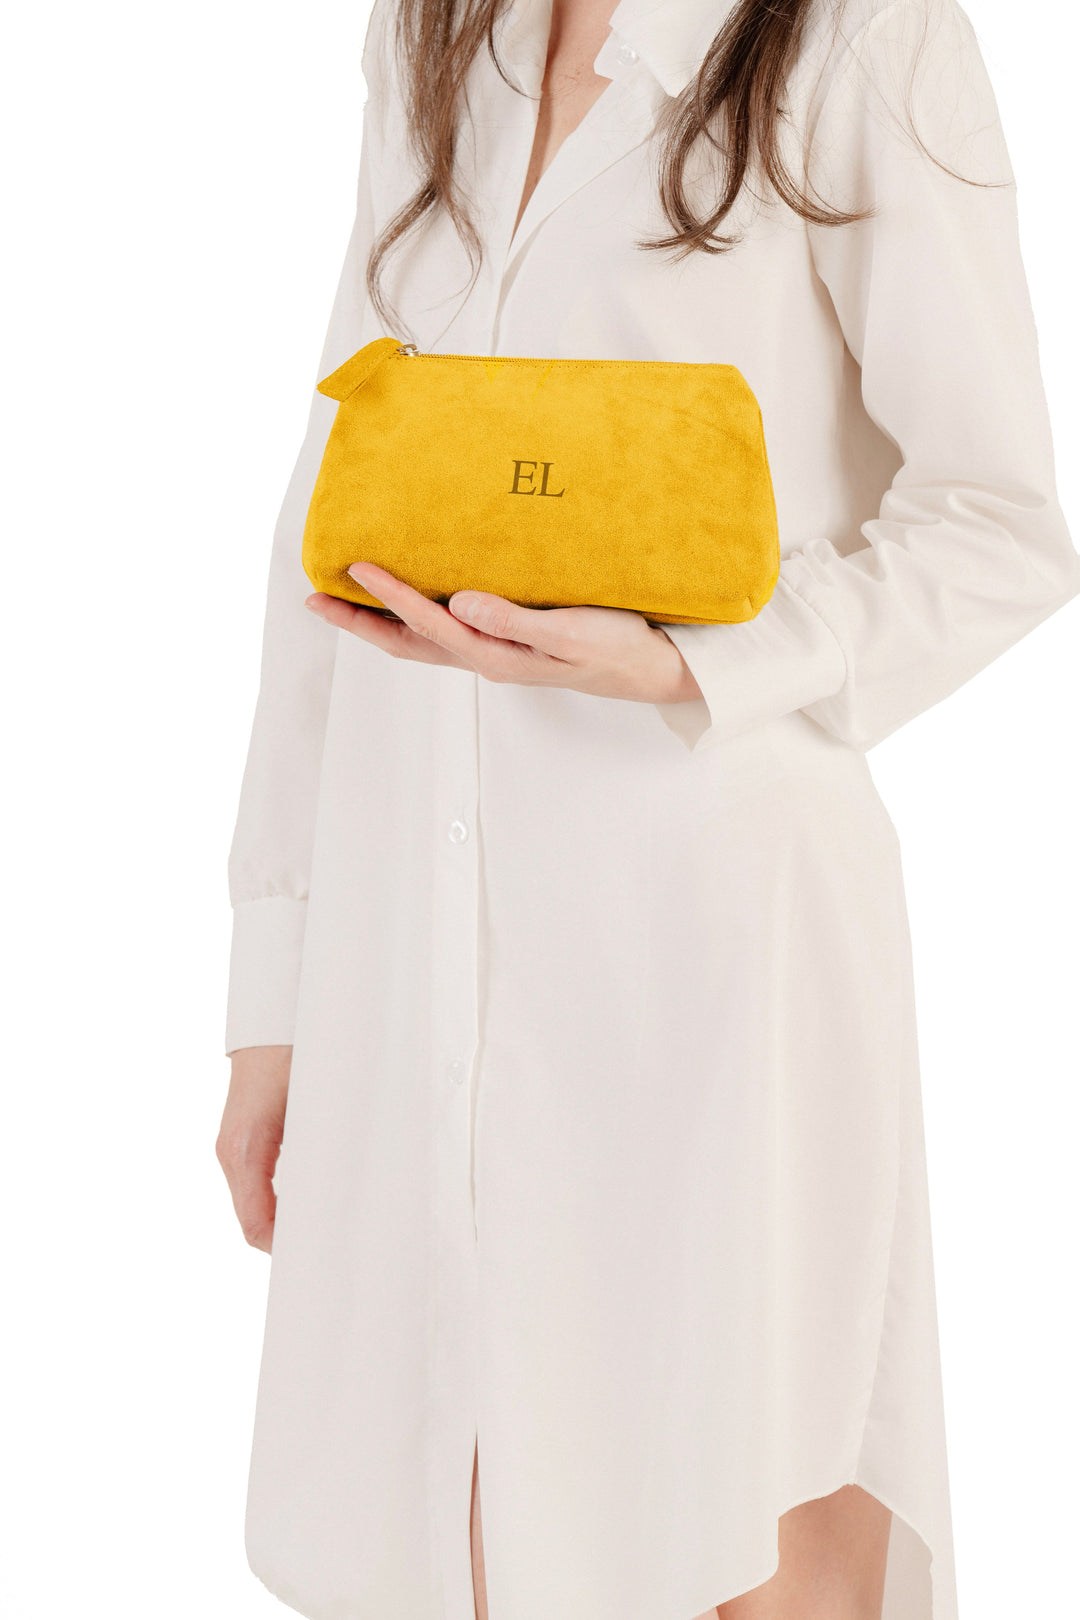 Woman in a white dress holding a yellow clutch bag against a white background